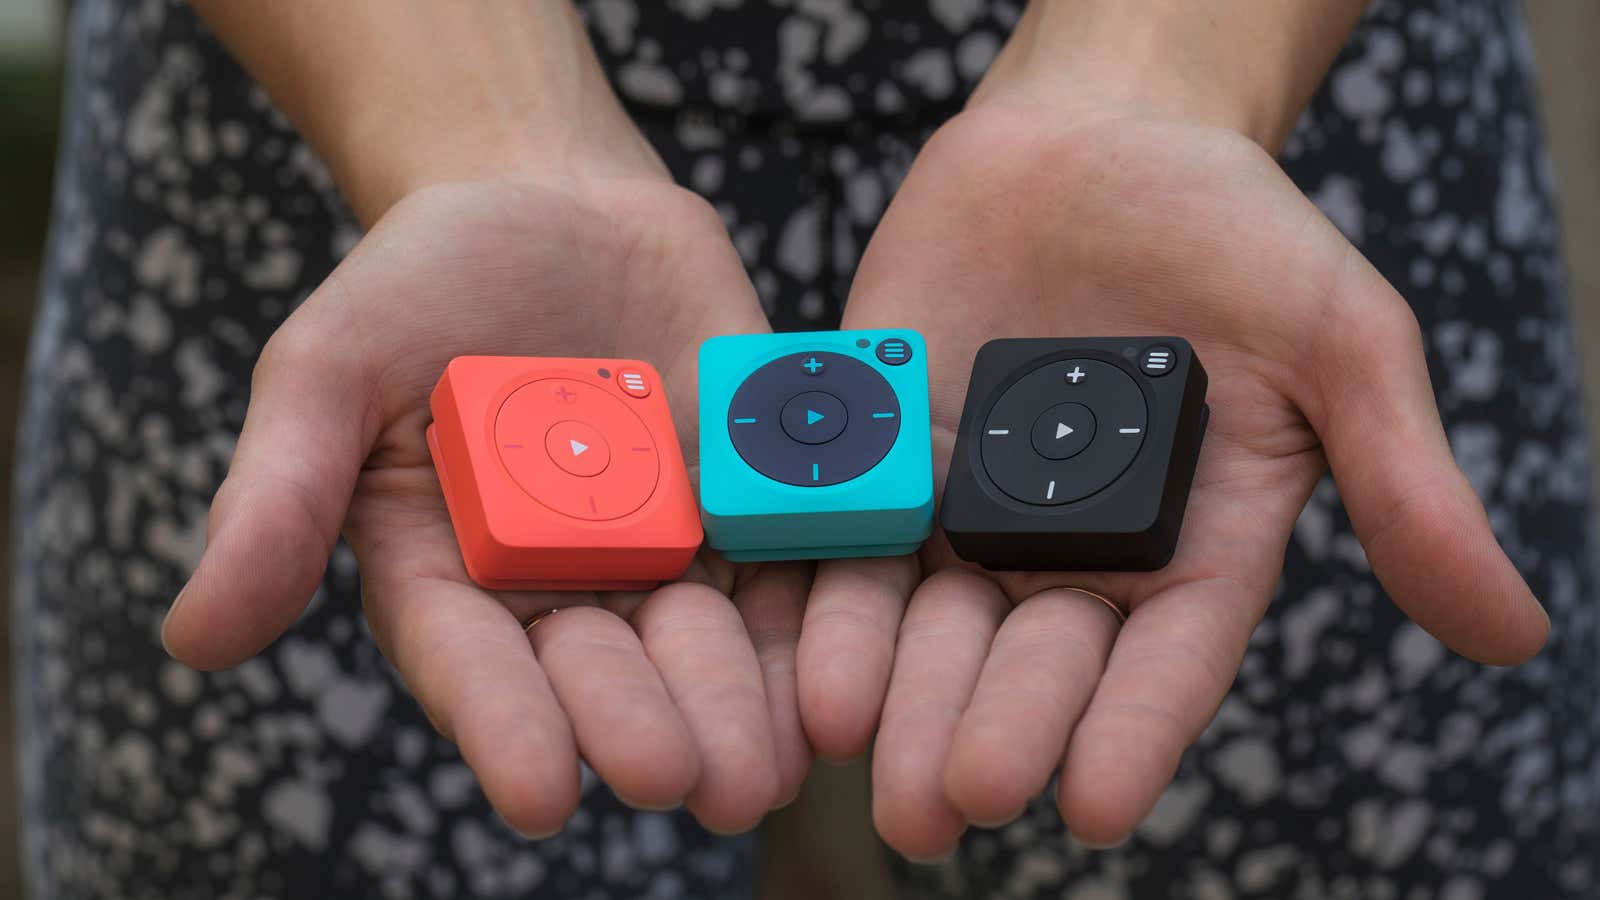 Streamed music in the palm of your hands.